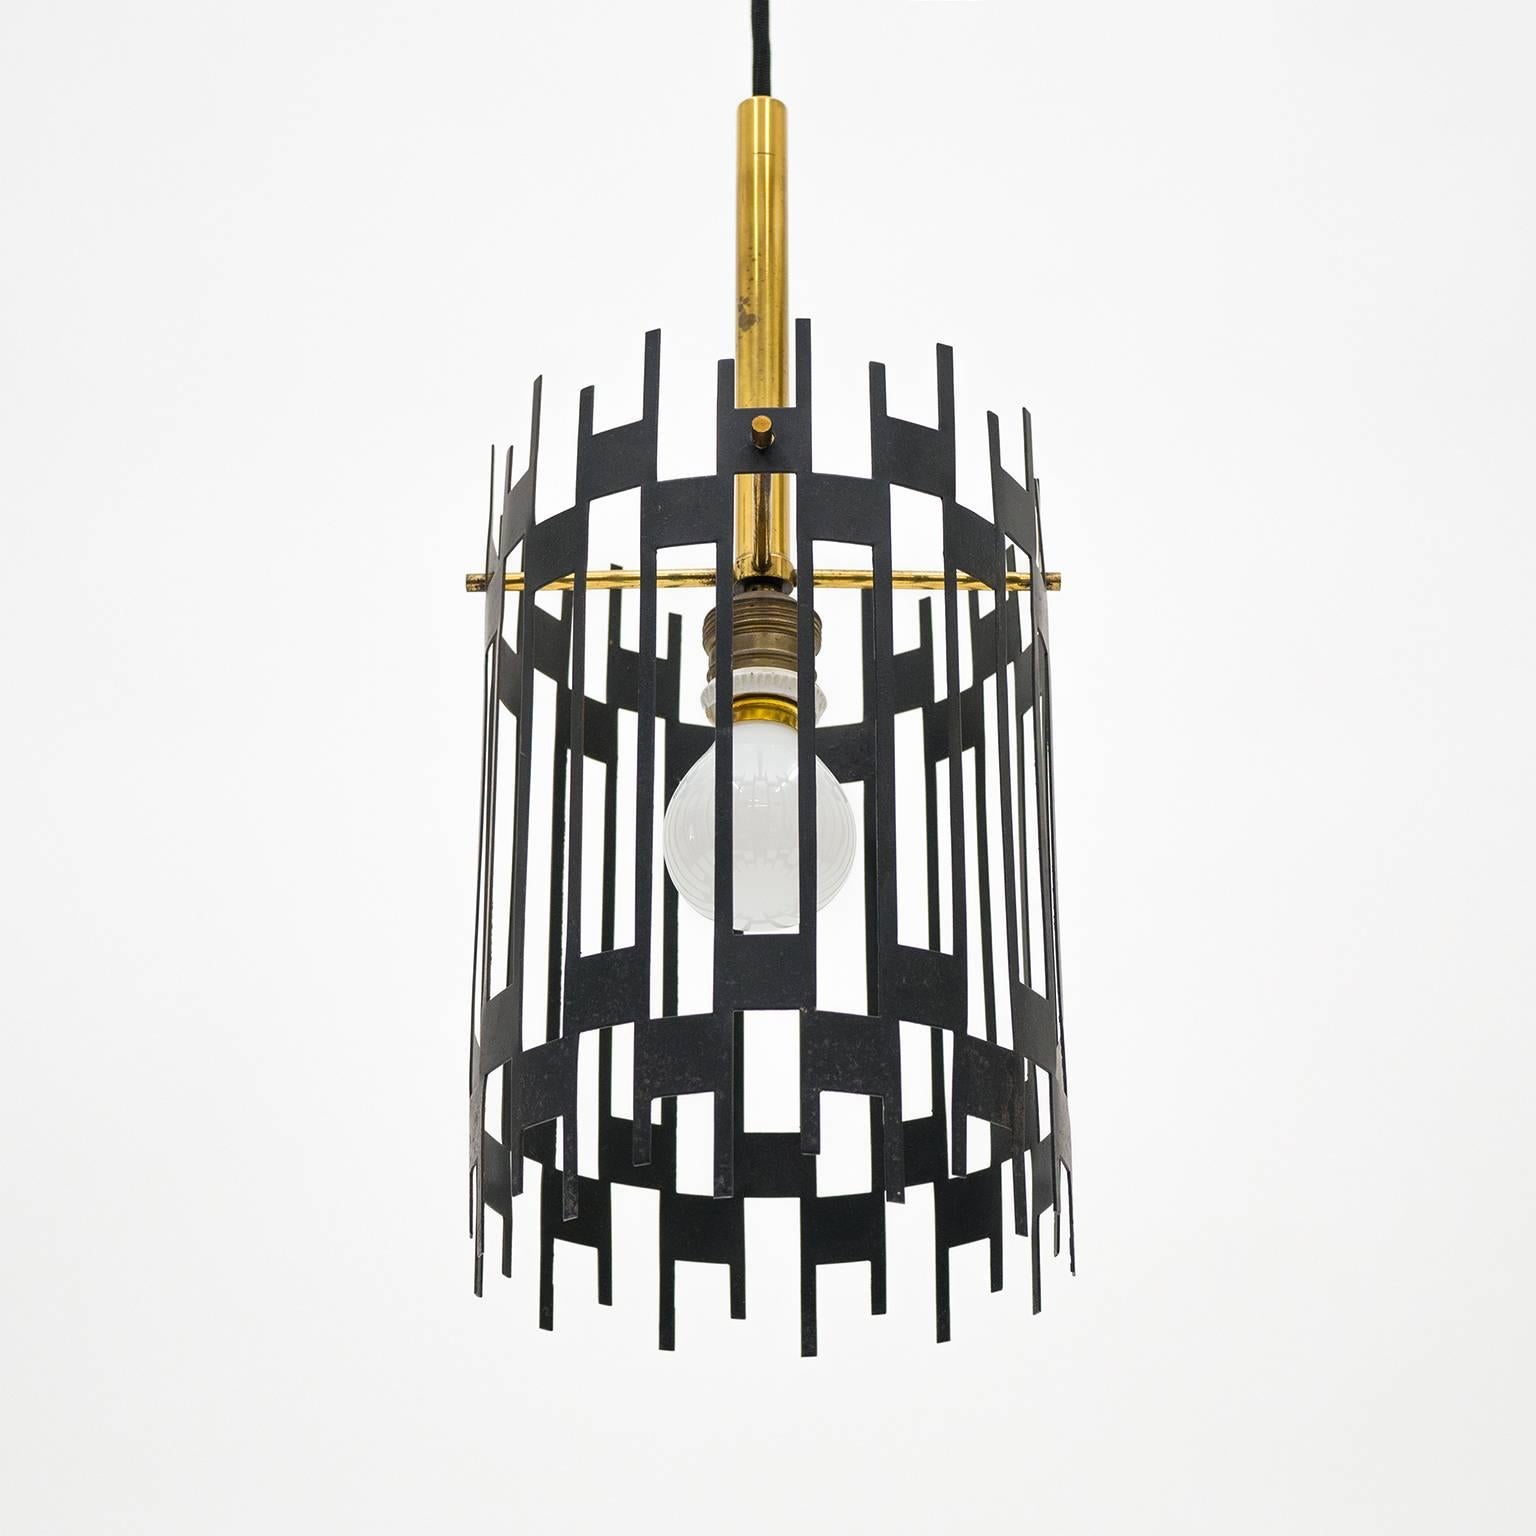 Highly unique modernist cage pendant or lantern from Italy, 1950s. A geometric graphical black lacquered steel structure is fitted on a minimalist brass support enclosing a single bulb. Nice original vintage condition with some patina to the brass